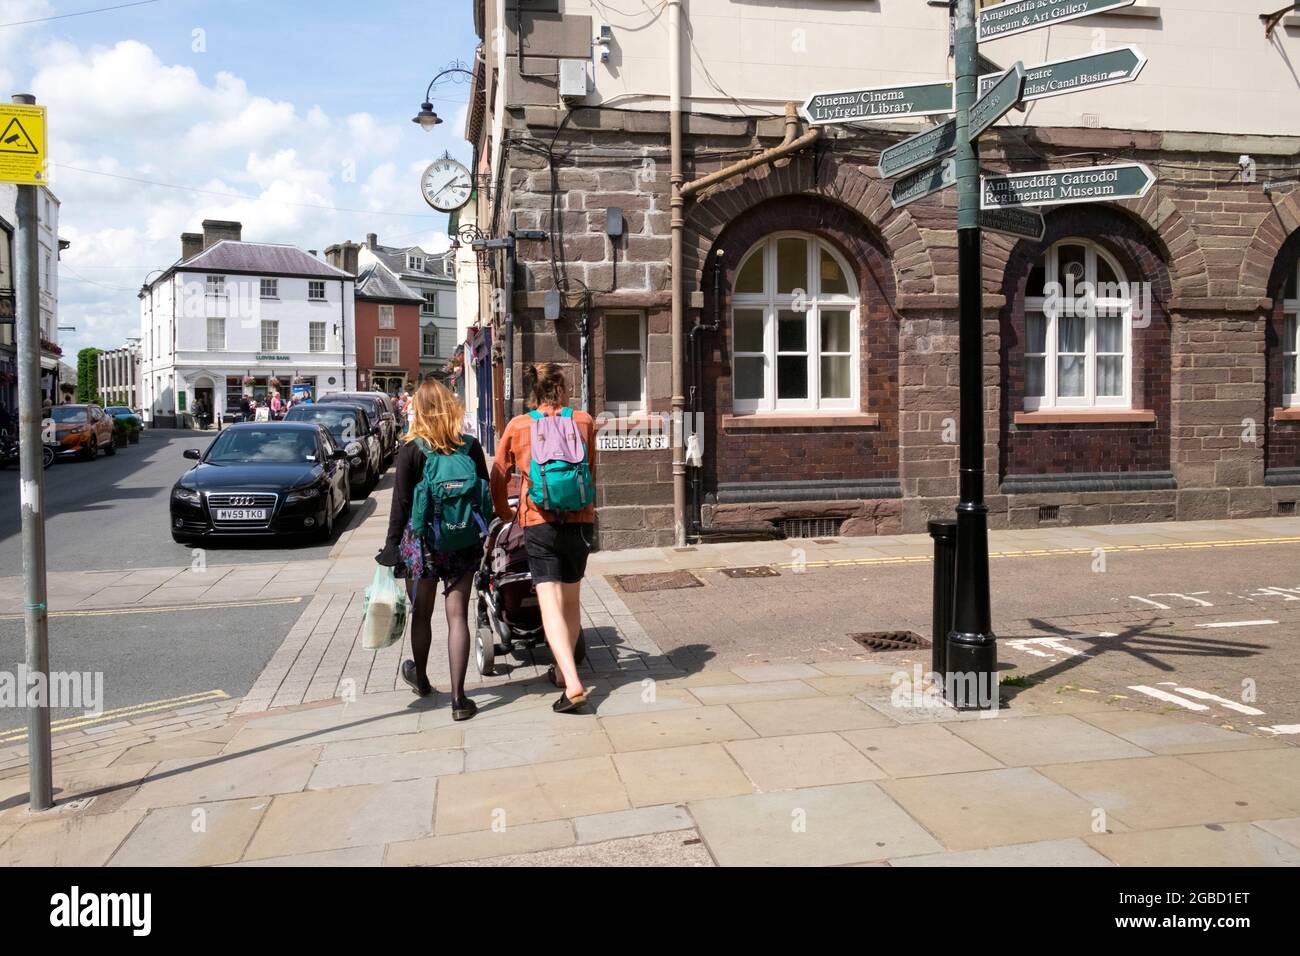 Rear view of young couple with rucksacks pushing a pushchair on the main street in Brecon town centre summer 2021 Powys Wales UK Britain KATHY DEWITT Stock Photo